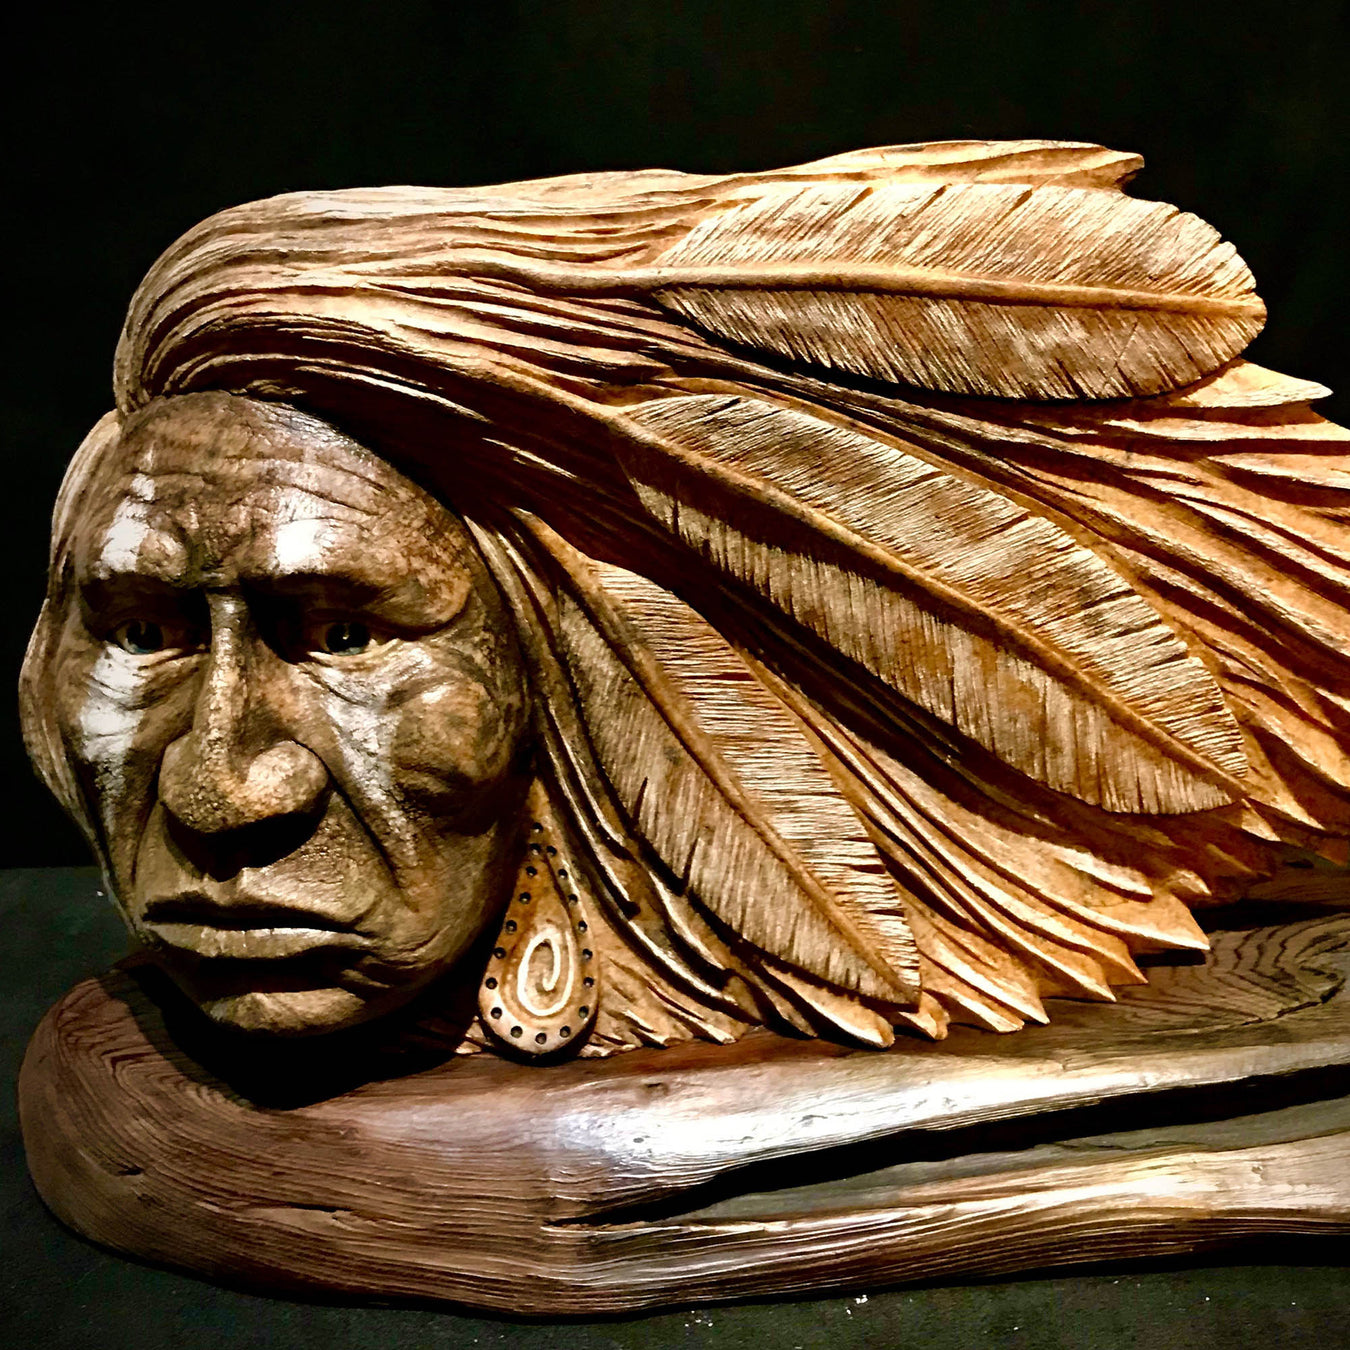 Native Expressions | Artfest Ontario